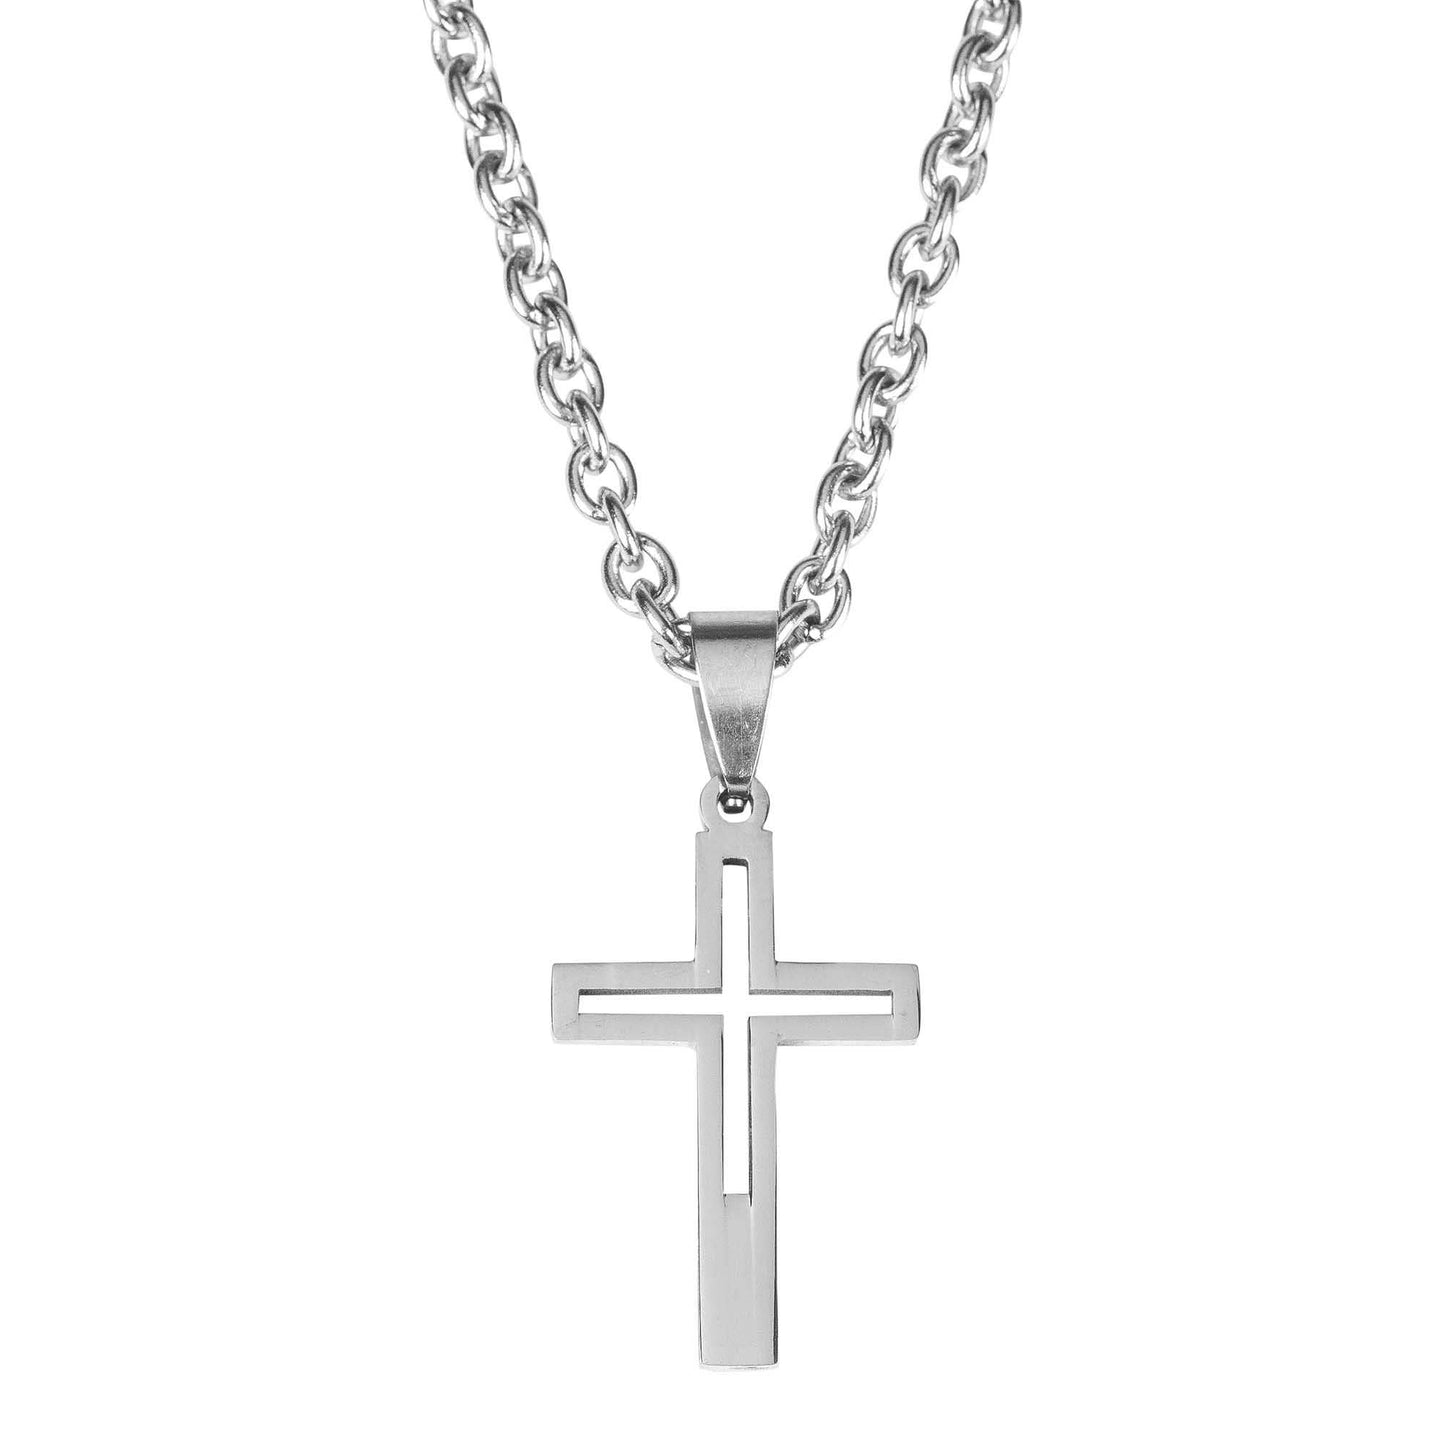 To My Grandson Cross Necklace